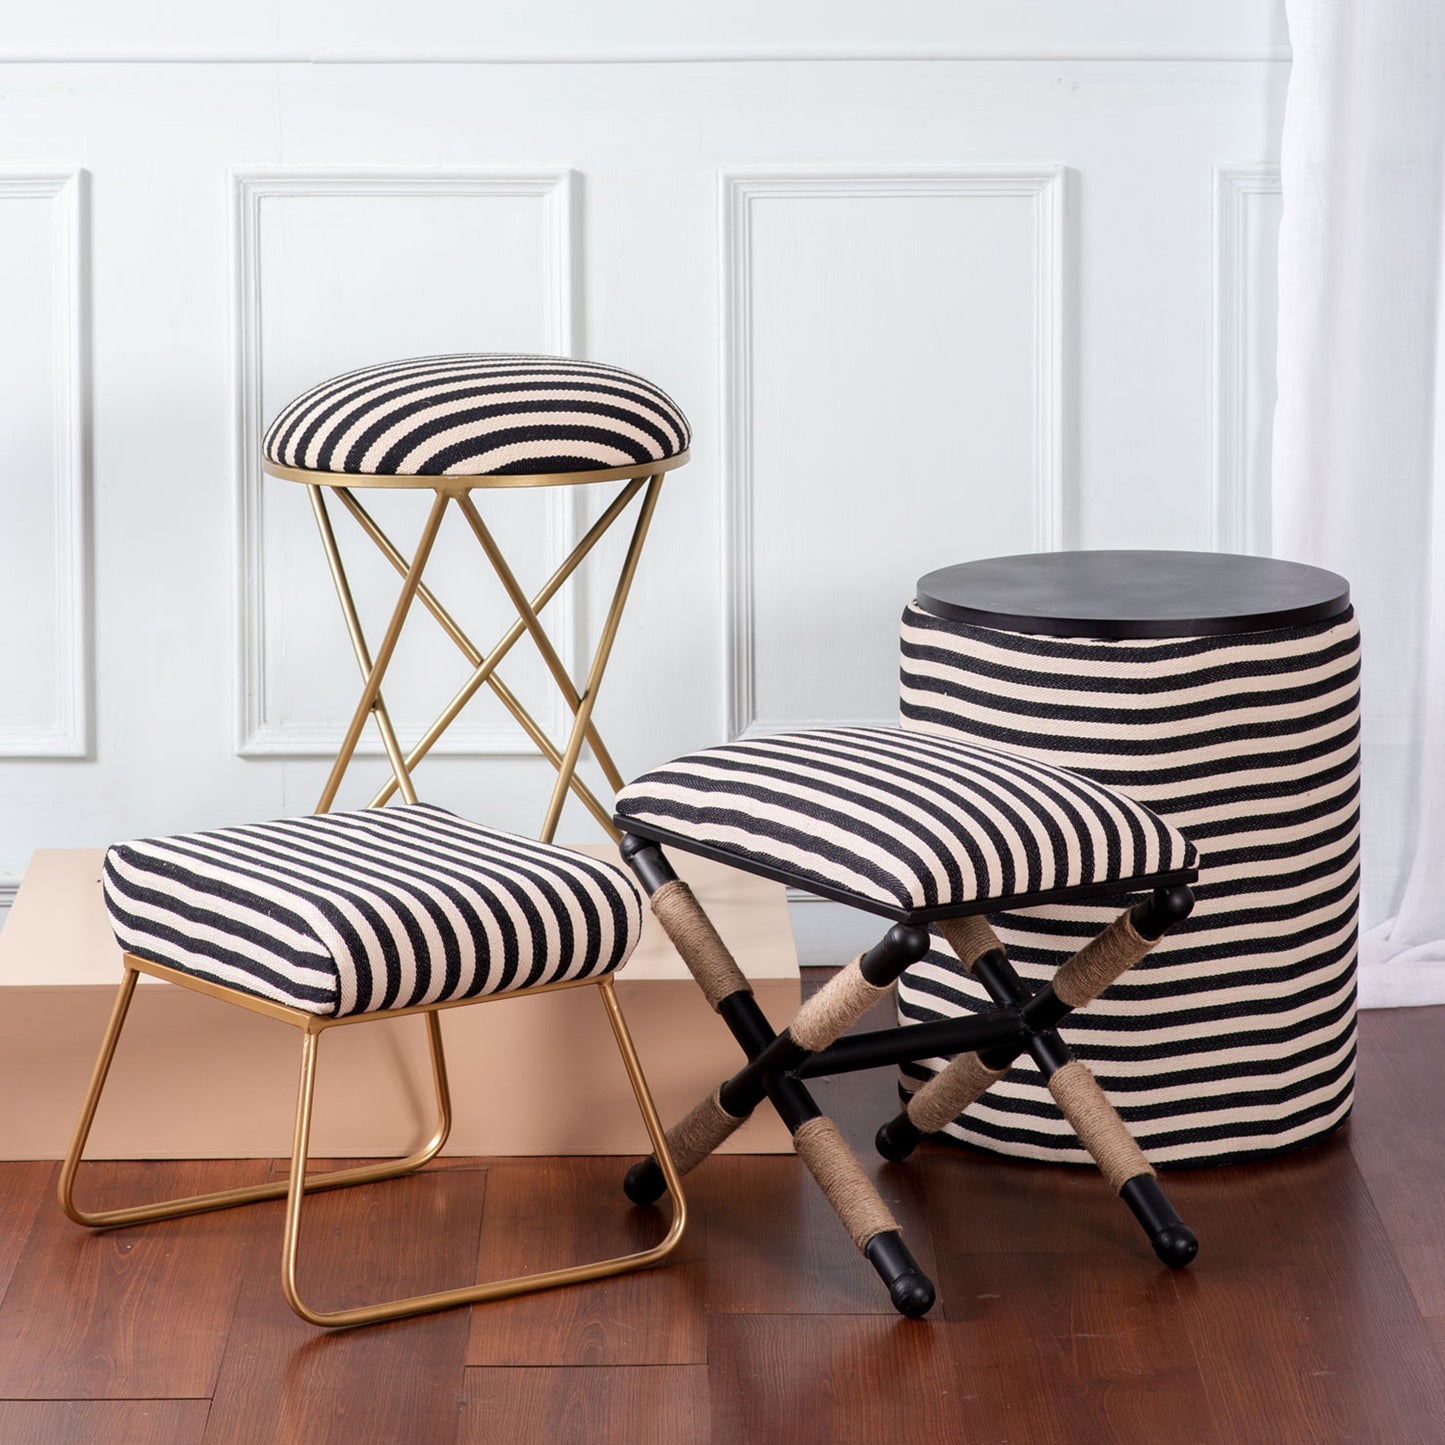 black and white metallic ottoman stools by Nestroots